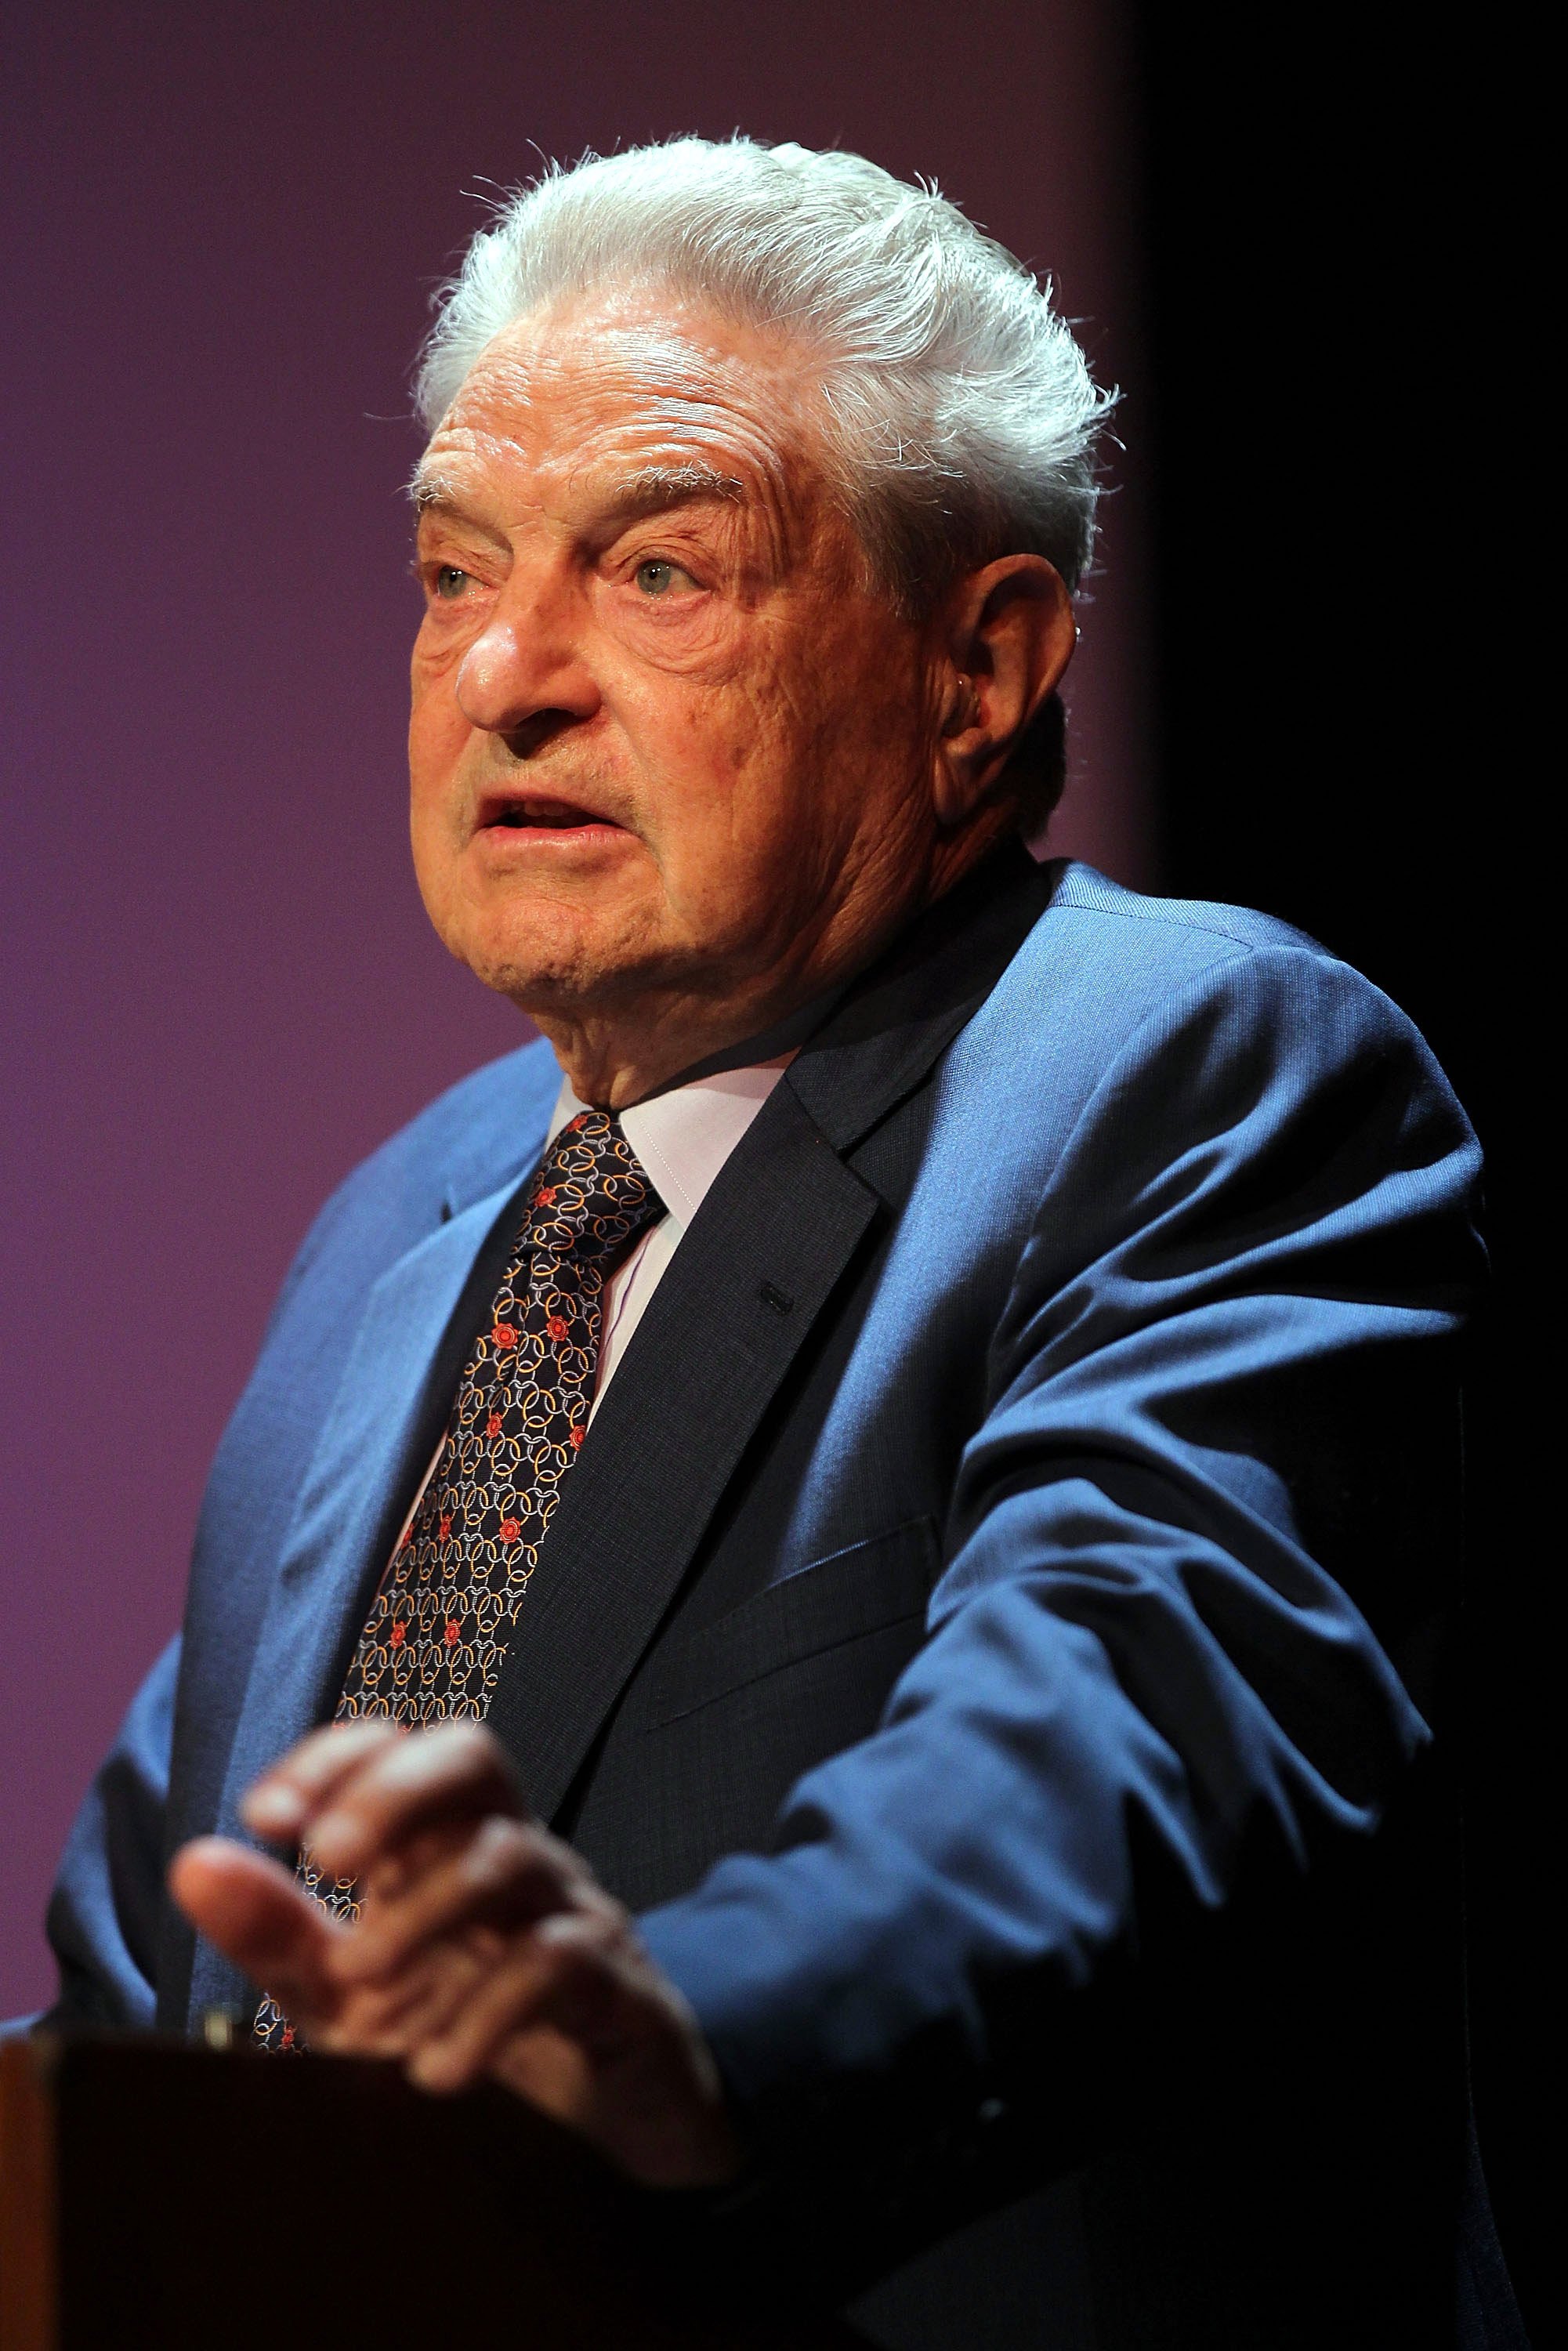 George Soros speaking at a forum on August 19, 2010, in New York City. | Source: Getty Images